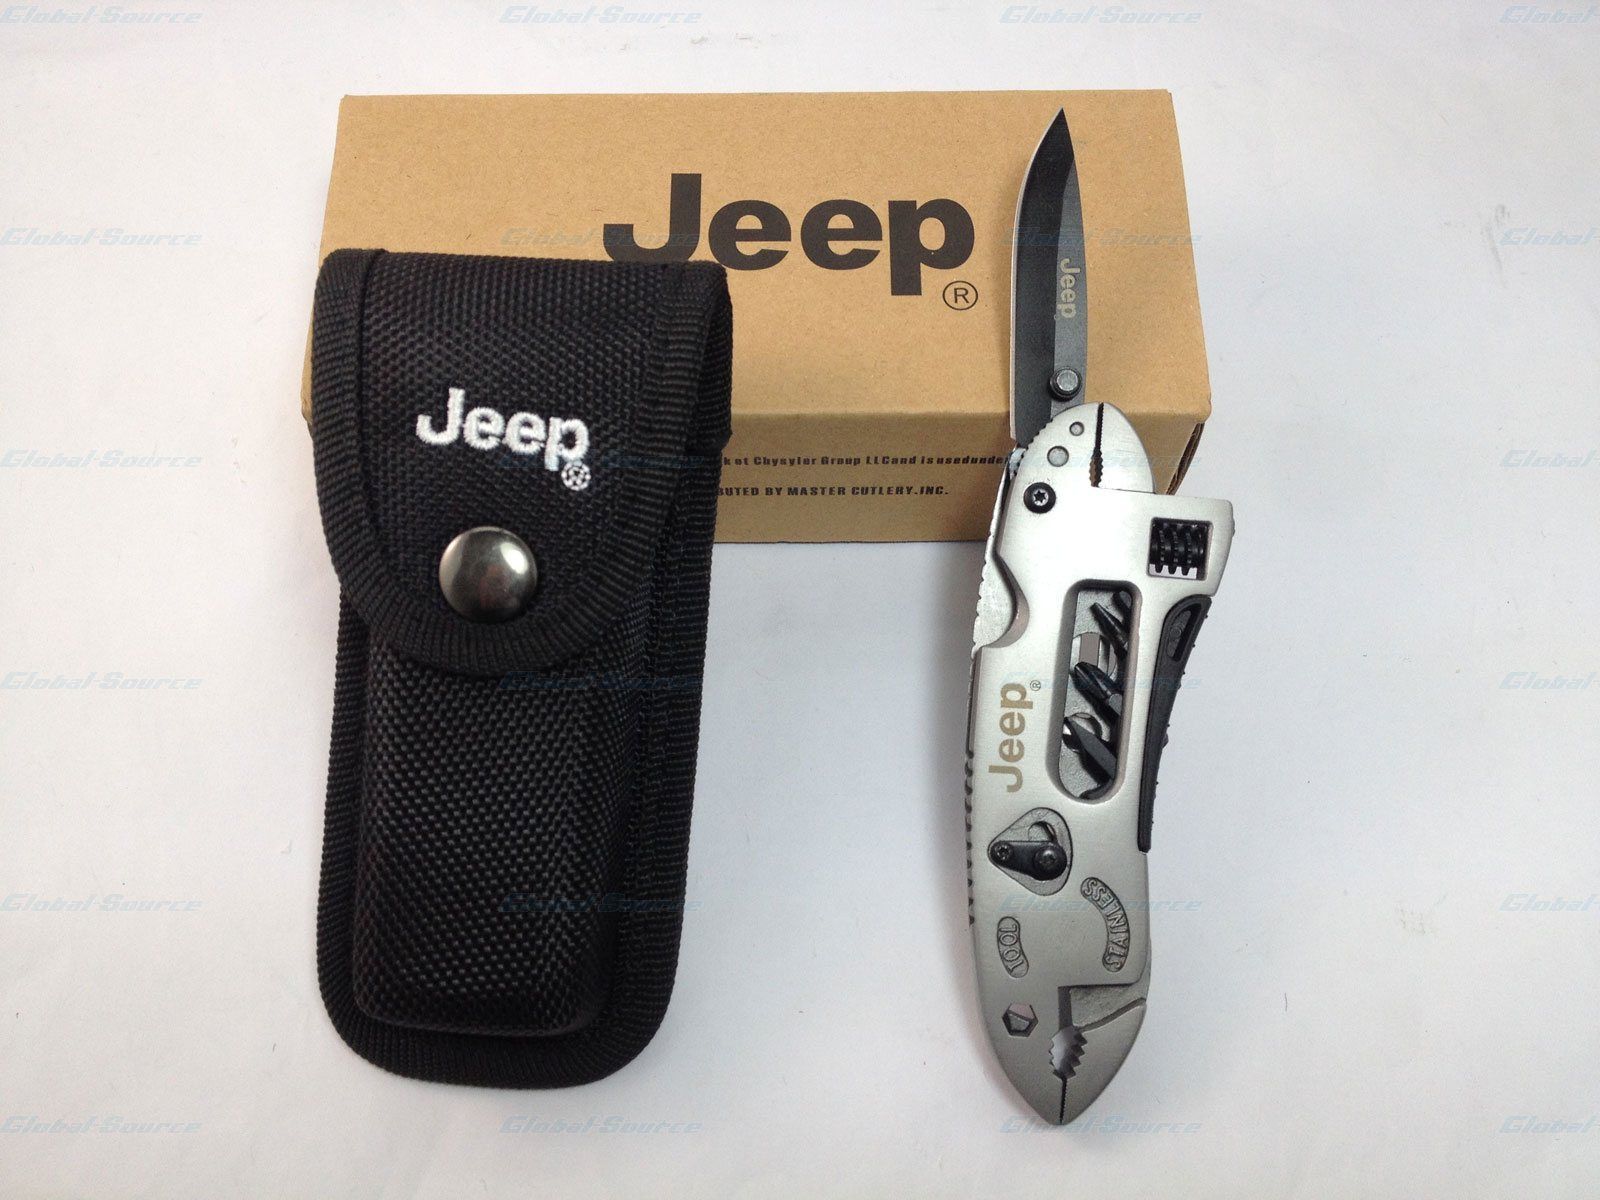 Jeep Multi-Tool Adjustable Wrench Jaw Screwdriver Plier Knife Survival Gear +Box